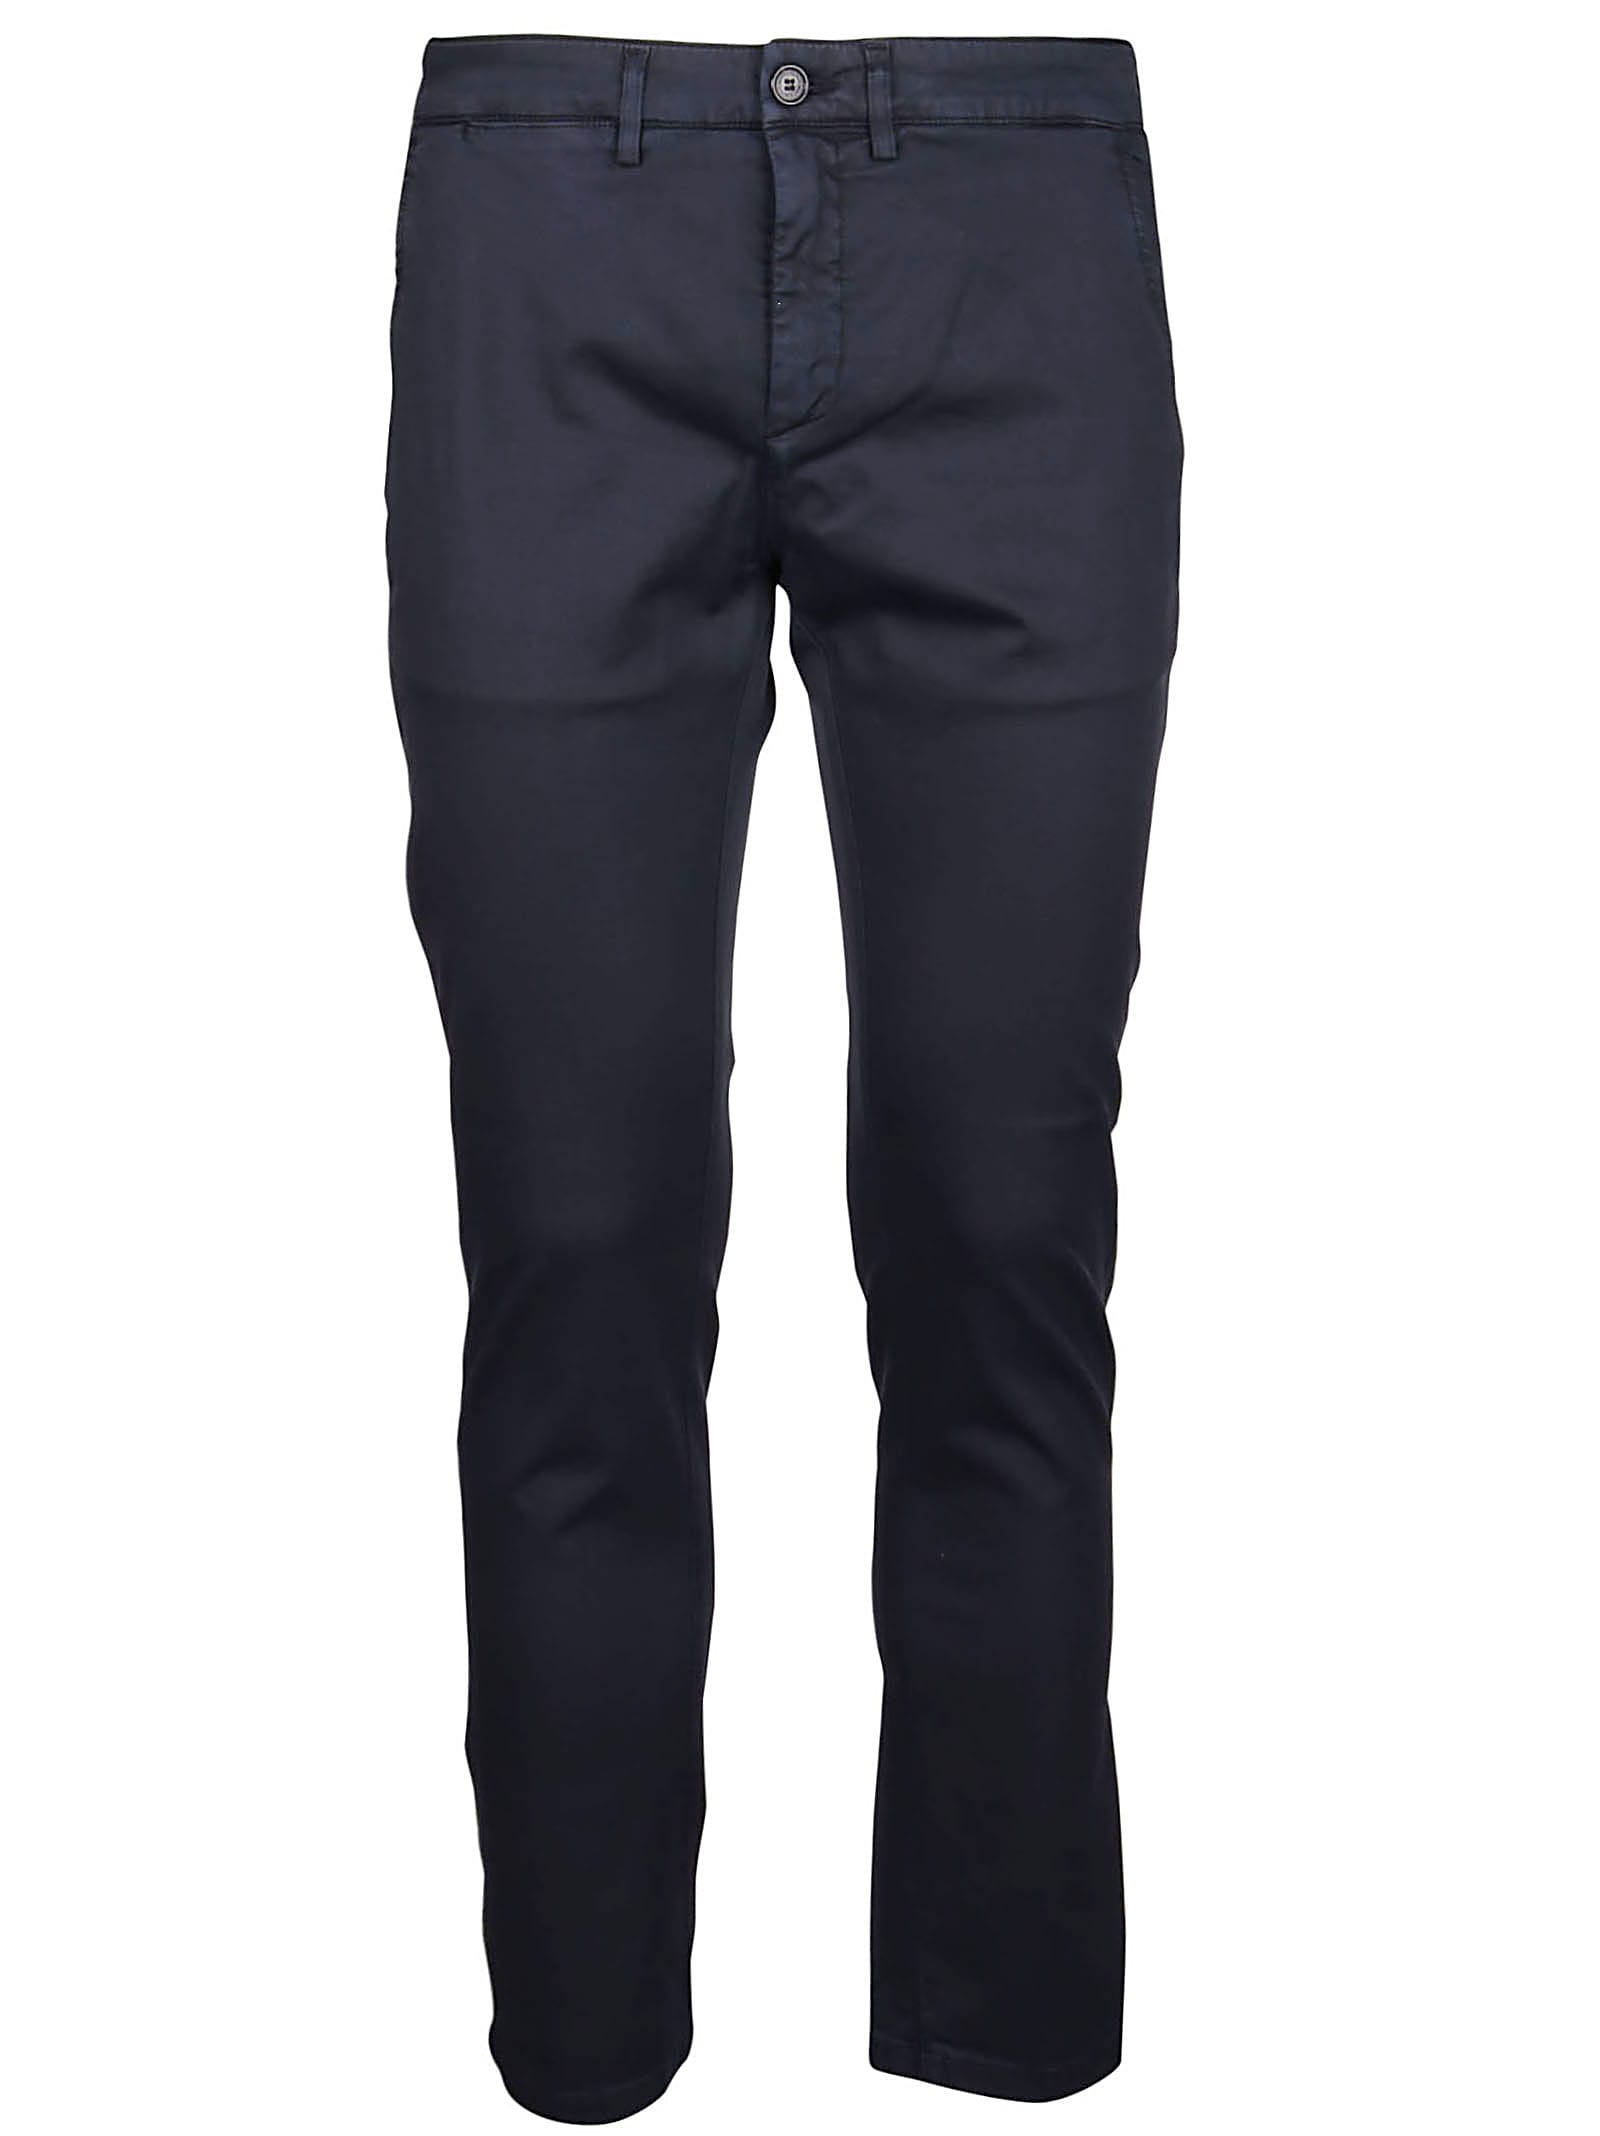 Department 5 Mike Pants Chinos Superslim